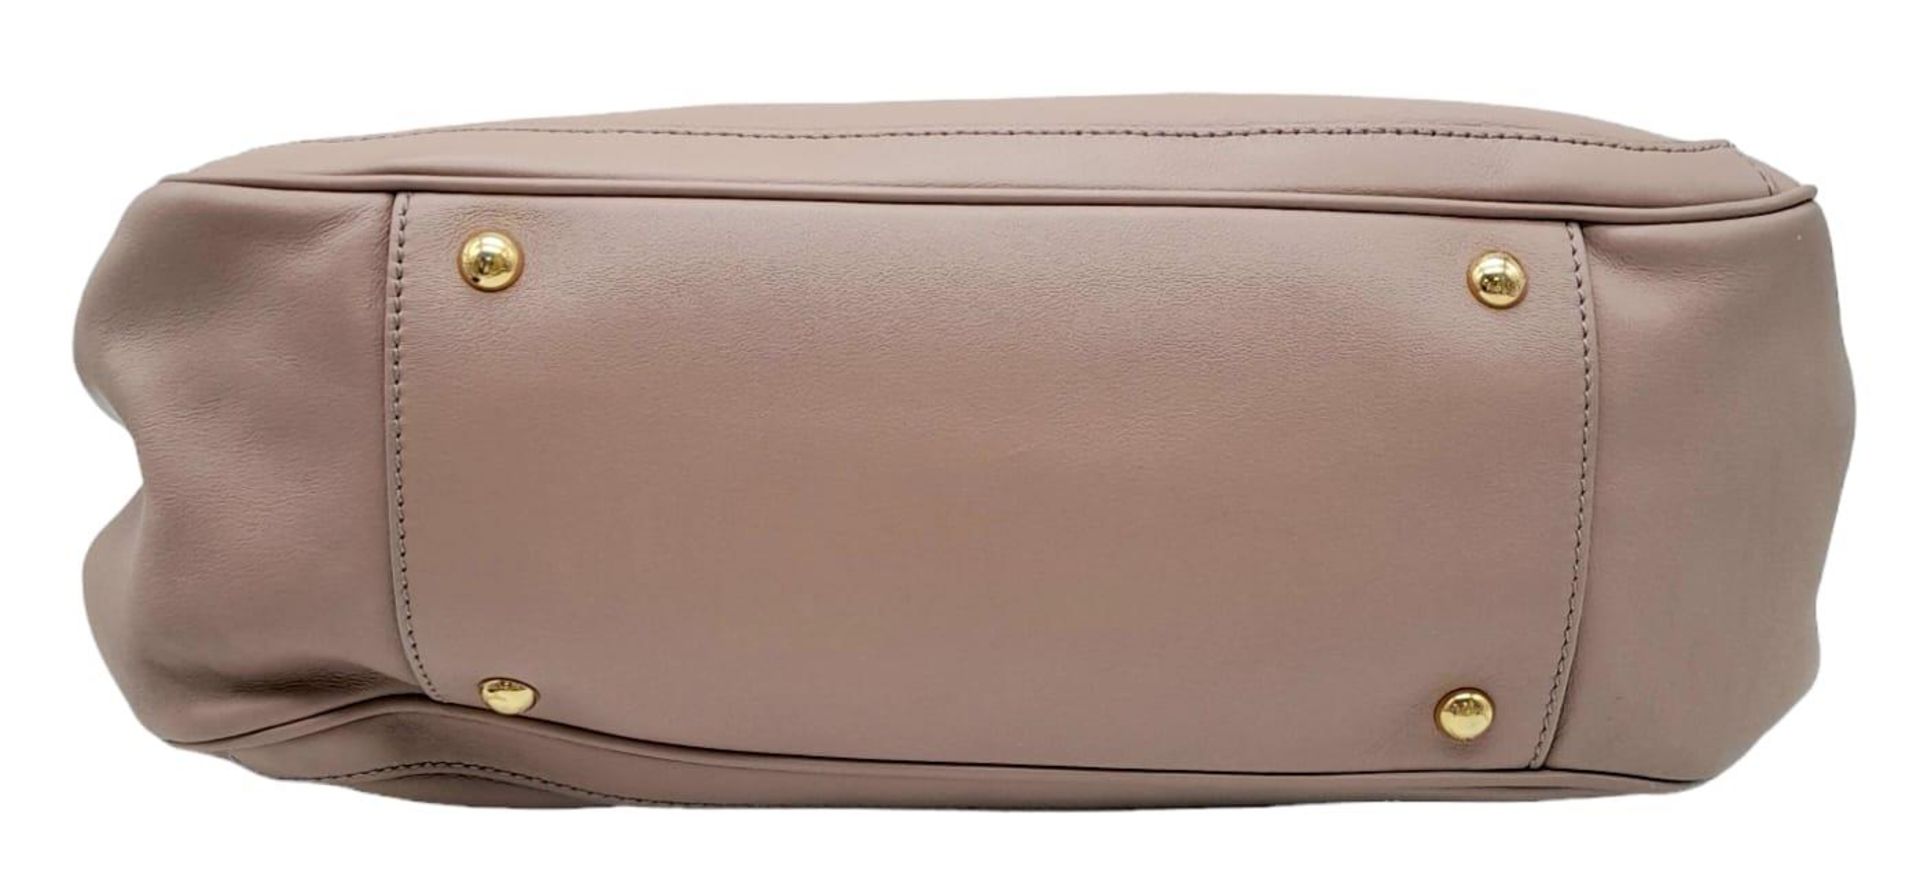 Salvatore Ferragamo Taupe Handbag. Double handle, central zipped compartment, gold tones and - Image 4 of 9